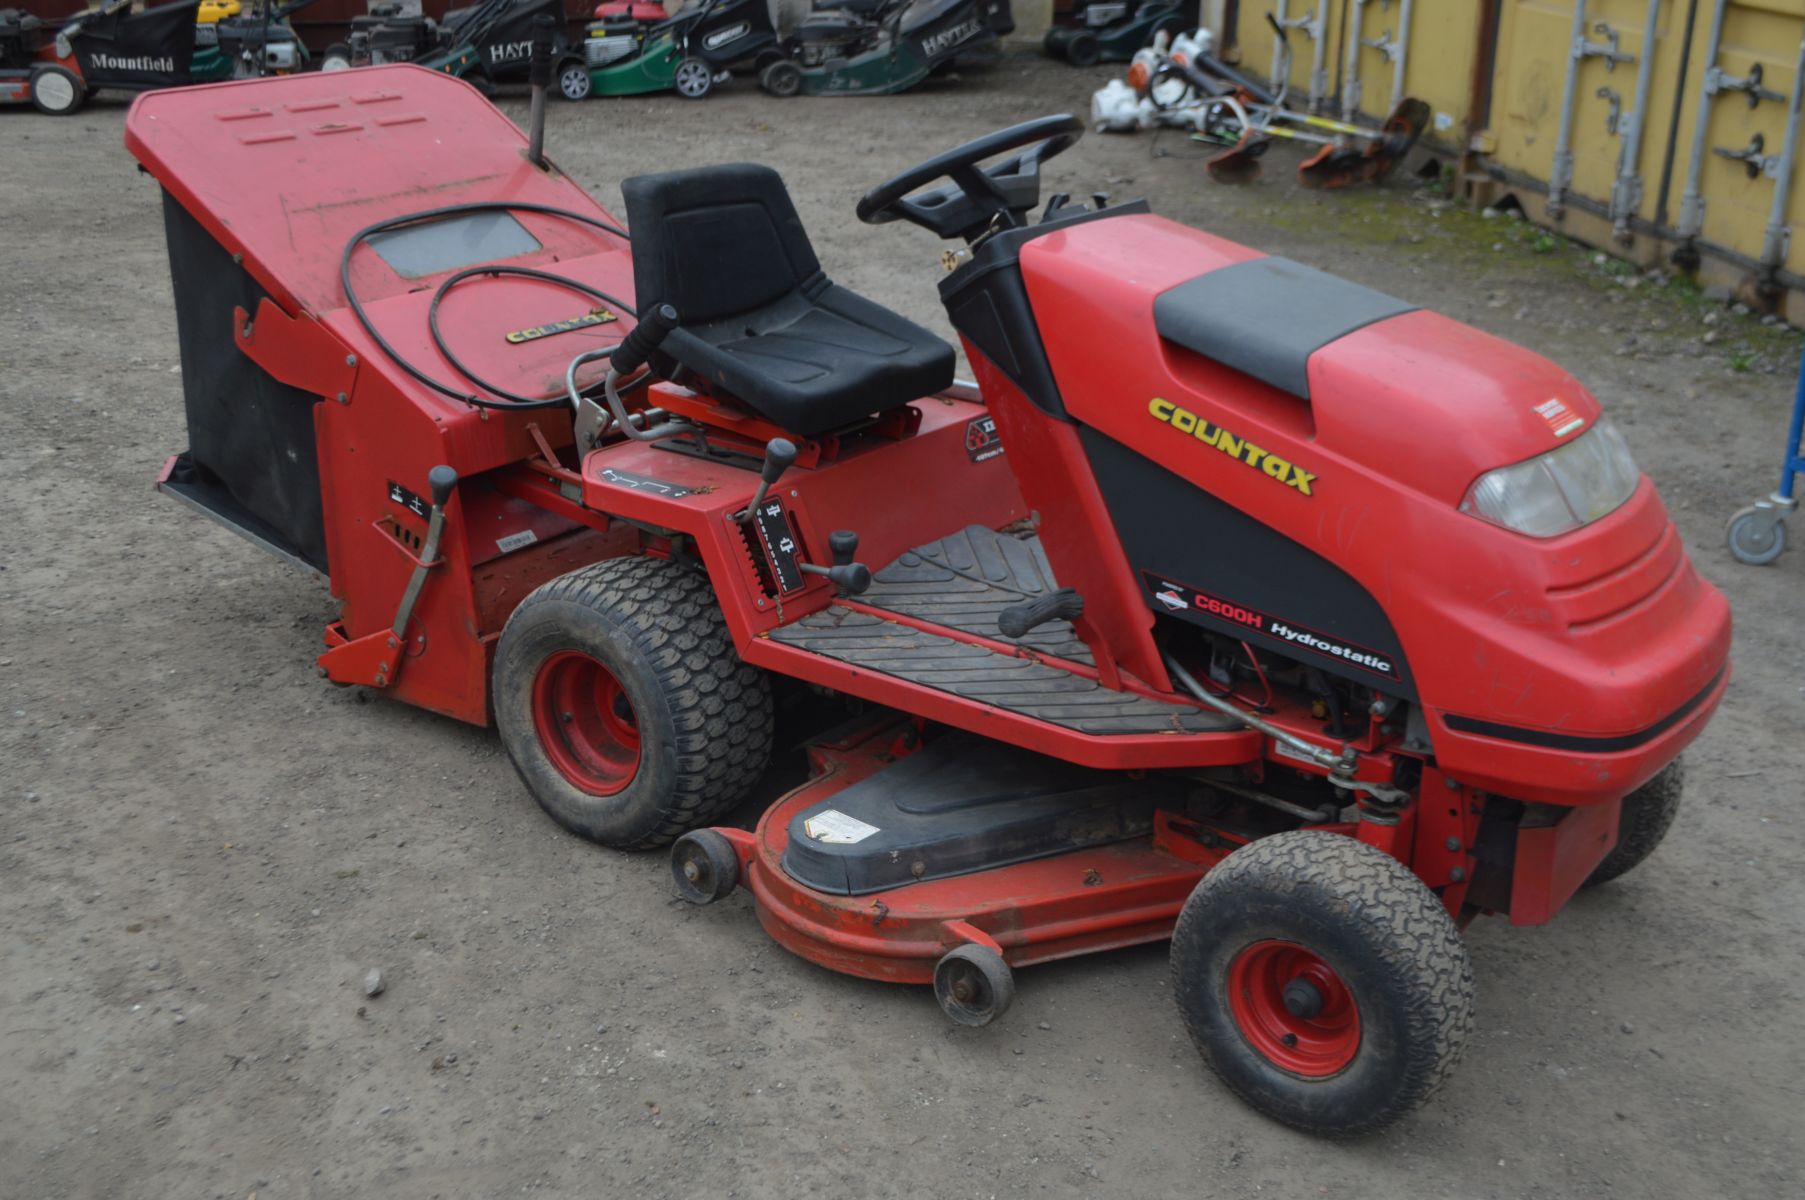 A COUNTAX HYDROSTATIC C600H RIDE ON LAWNMOWER, with a briggs and Stratton engine (key) - Image 2 of 7